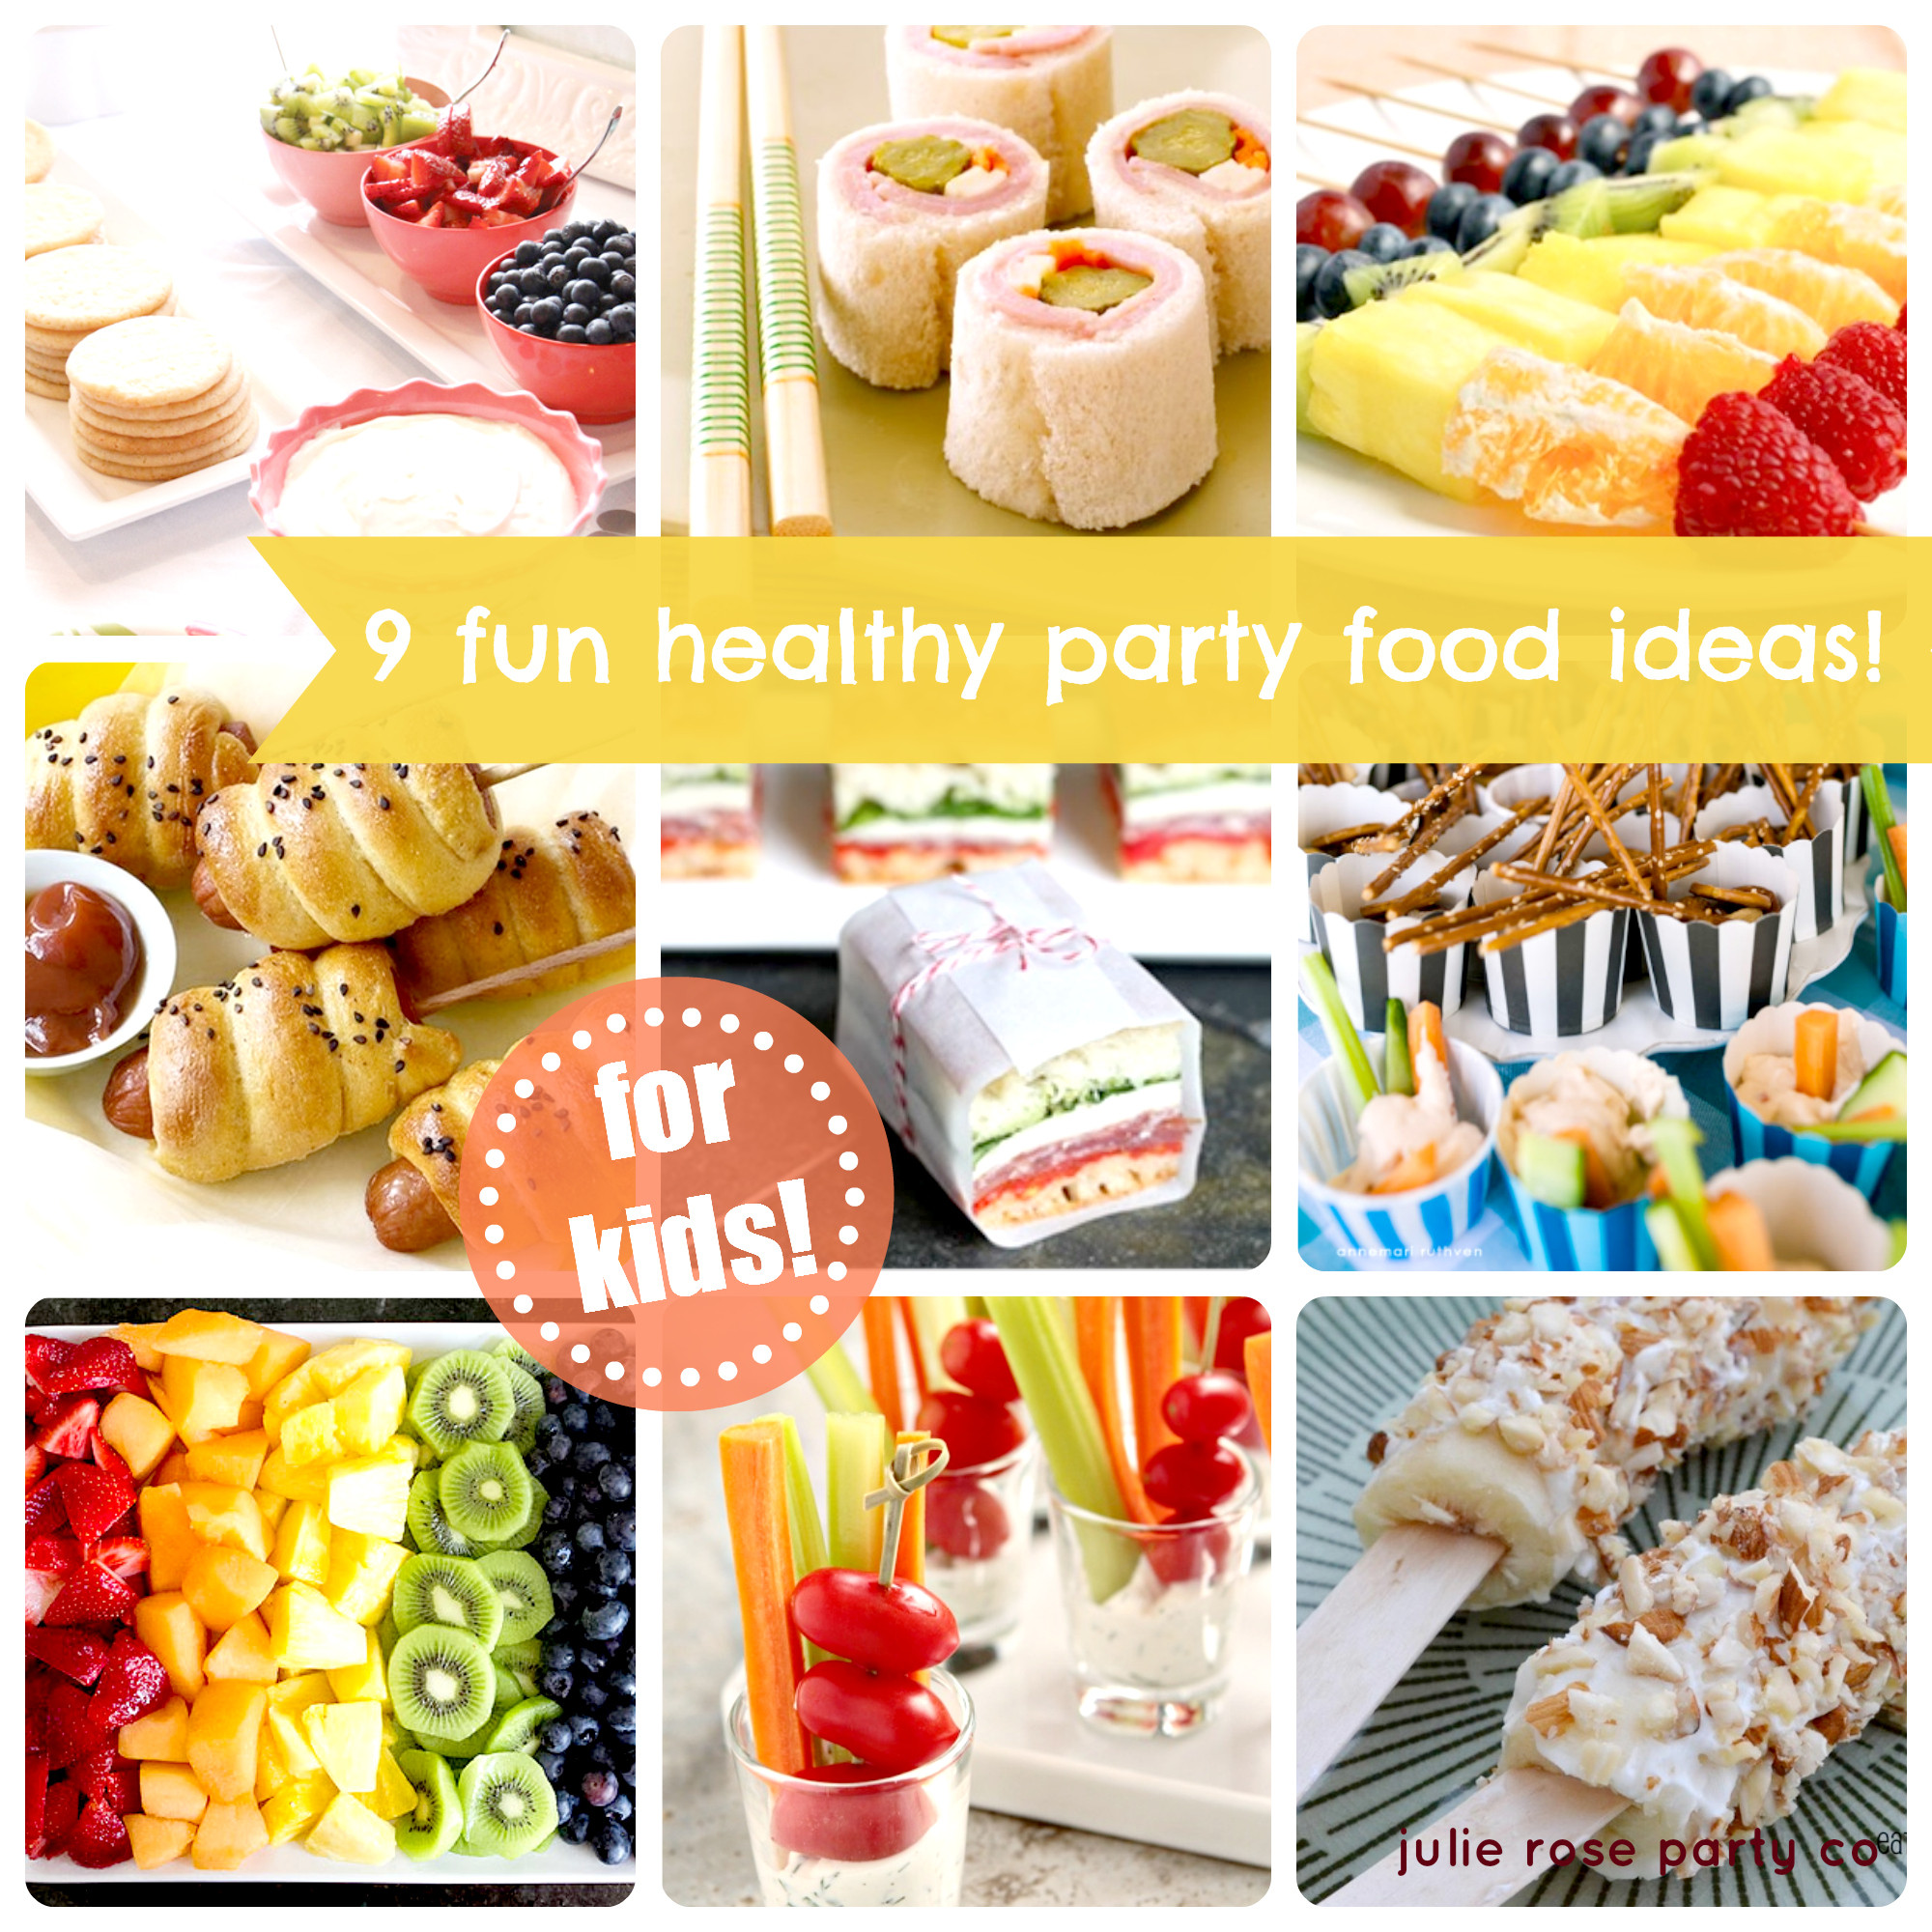 Kids Party Recipes
 9 fun and healthy party food ideas kids